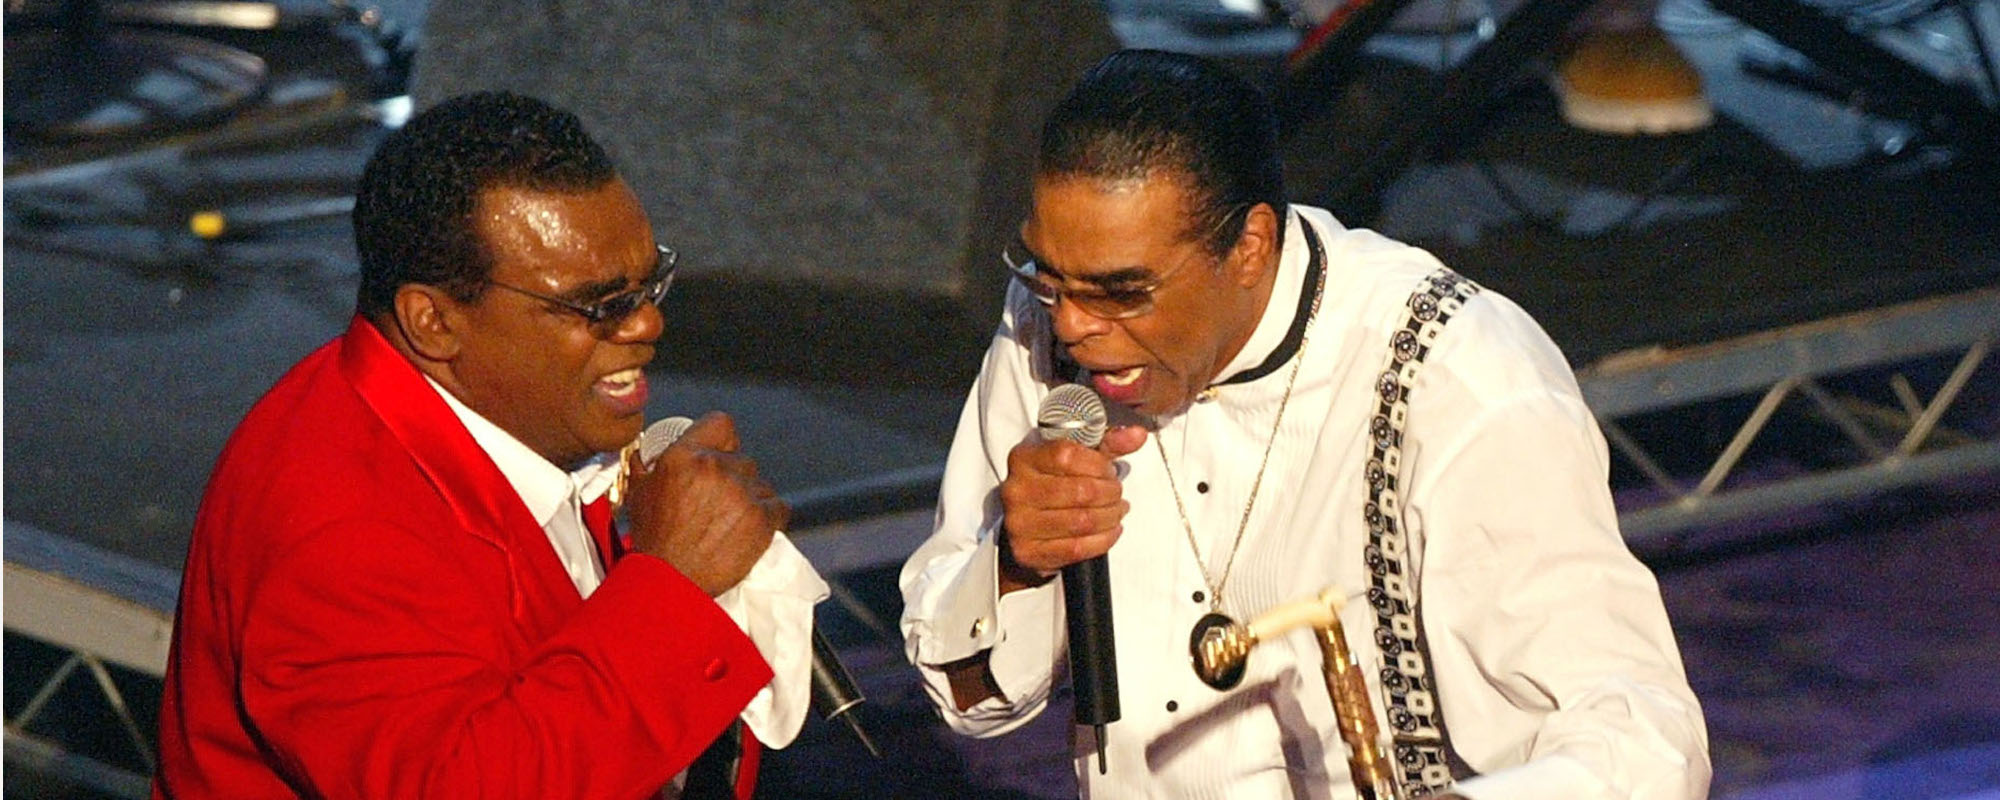 Rudolph Isley Sues Brother Ronald Isley Over The Isley Brothers Trademark